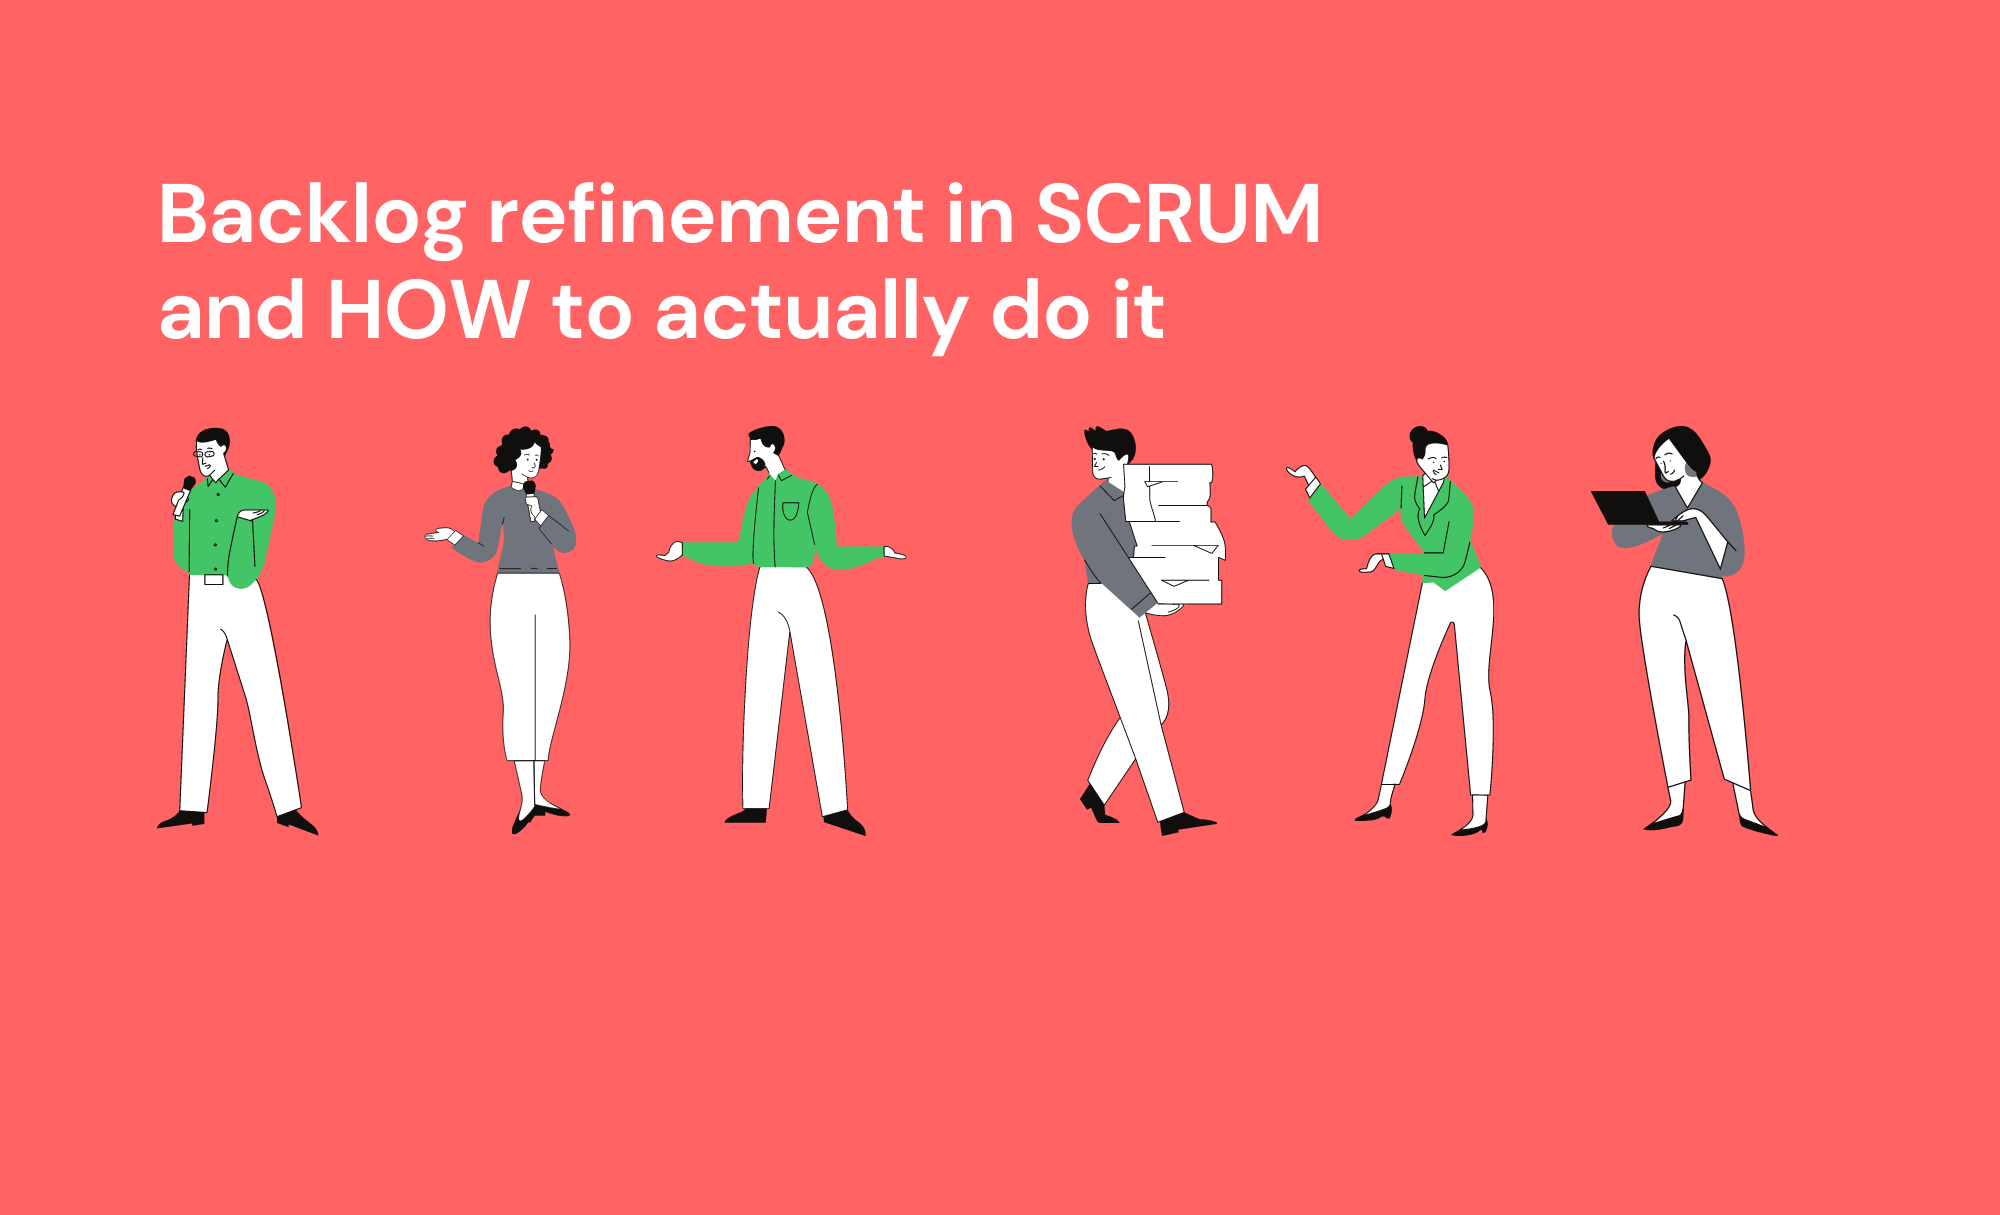 Backlog refinement in scrum and how to actually do it